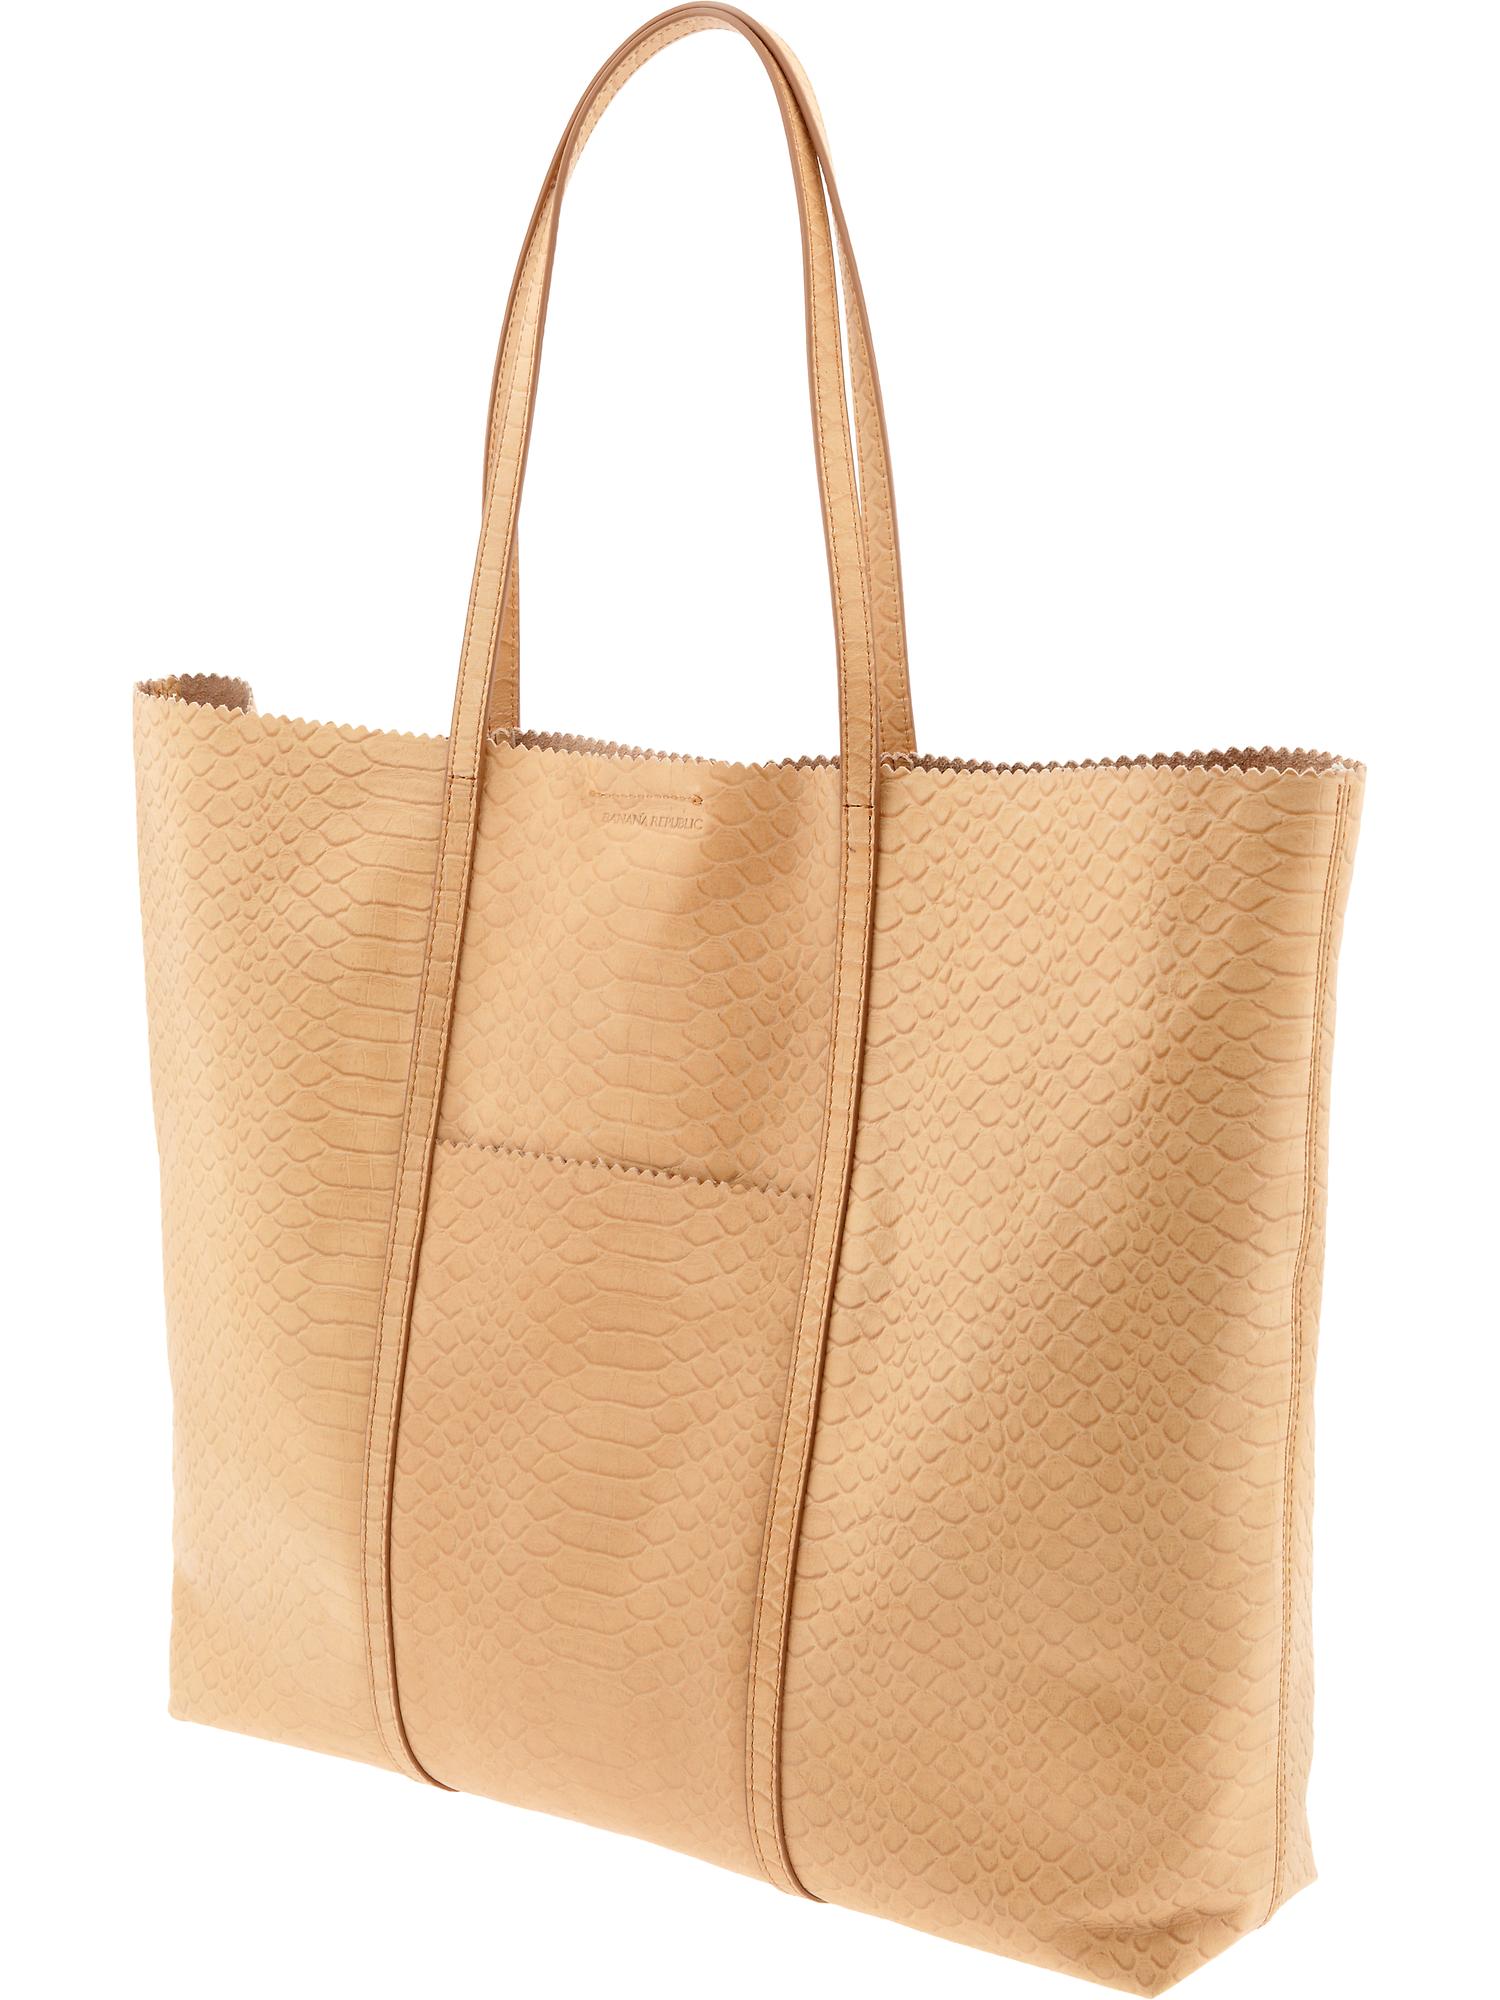 Paige pinking shears tote